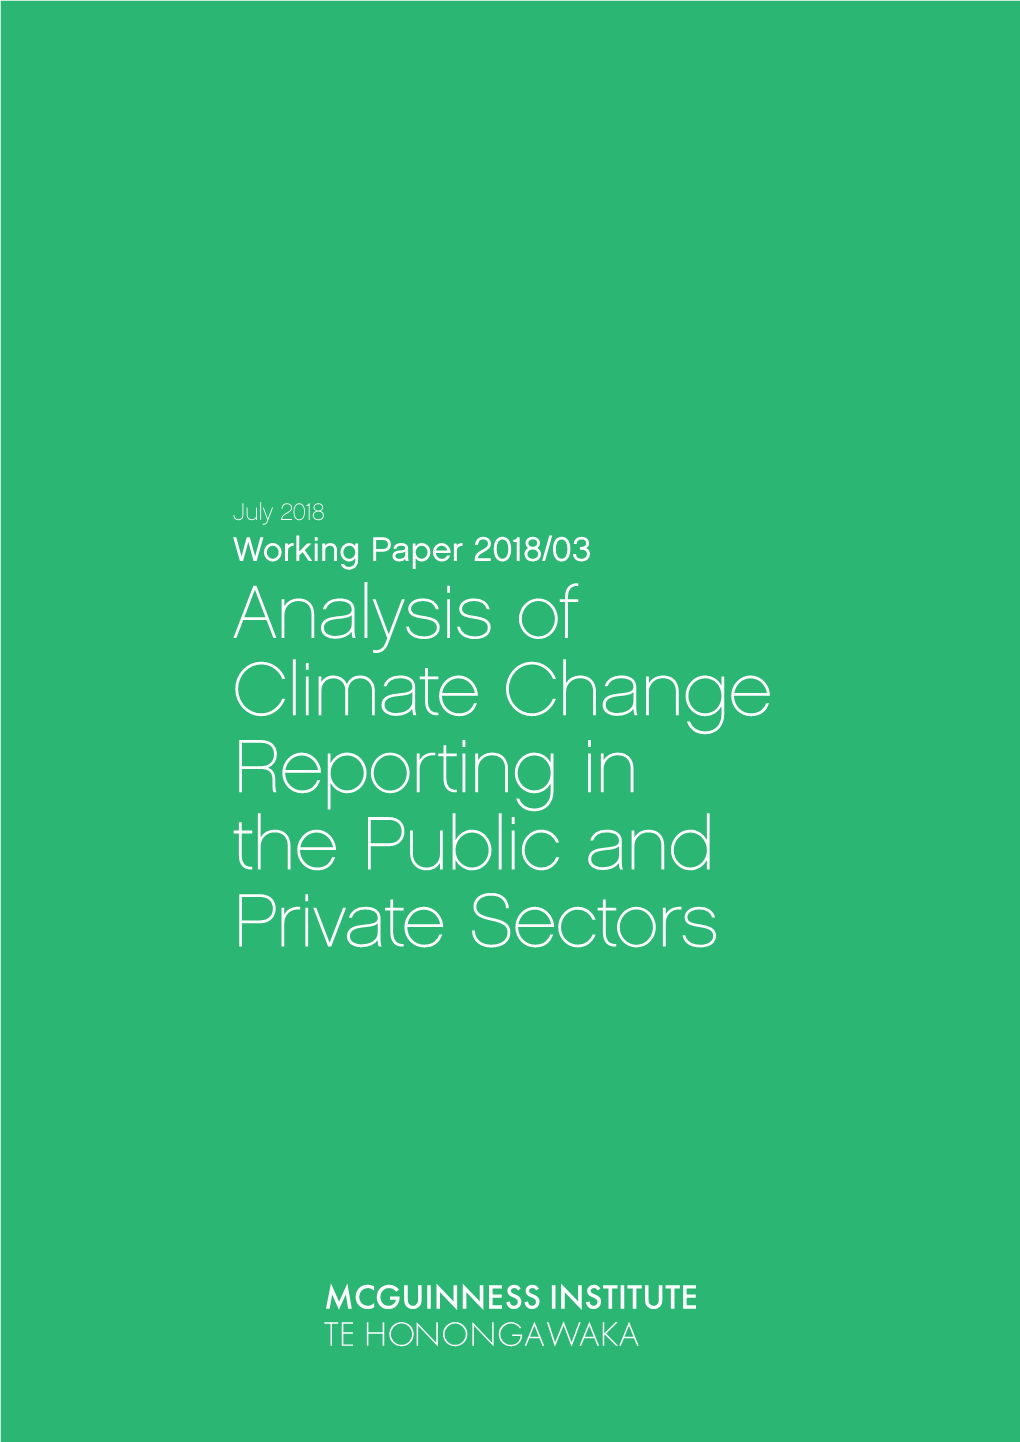 Analysis of Climate Change Reporting in the Public and Private Sectors